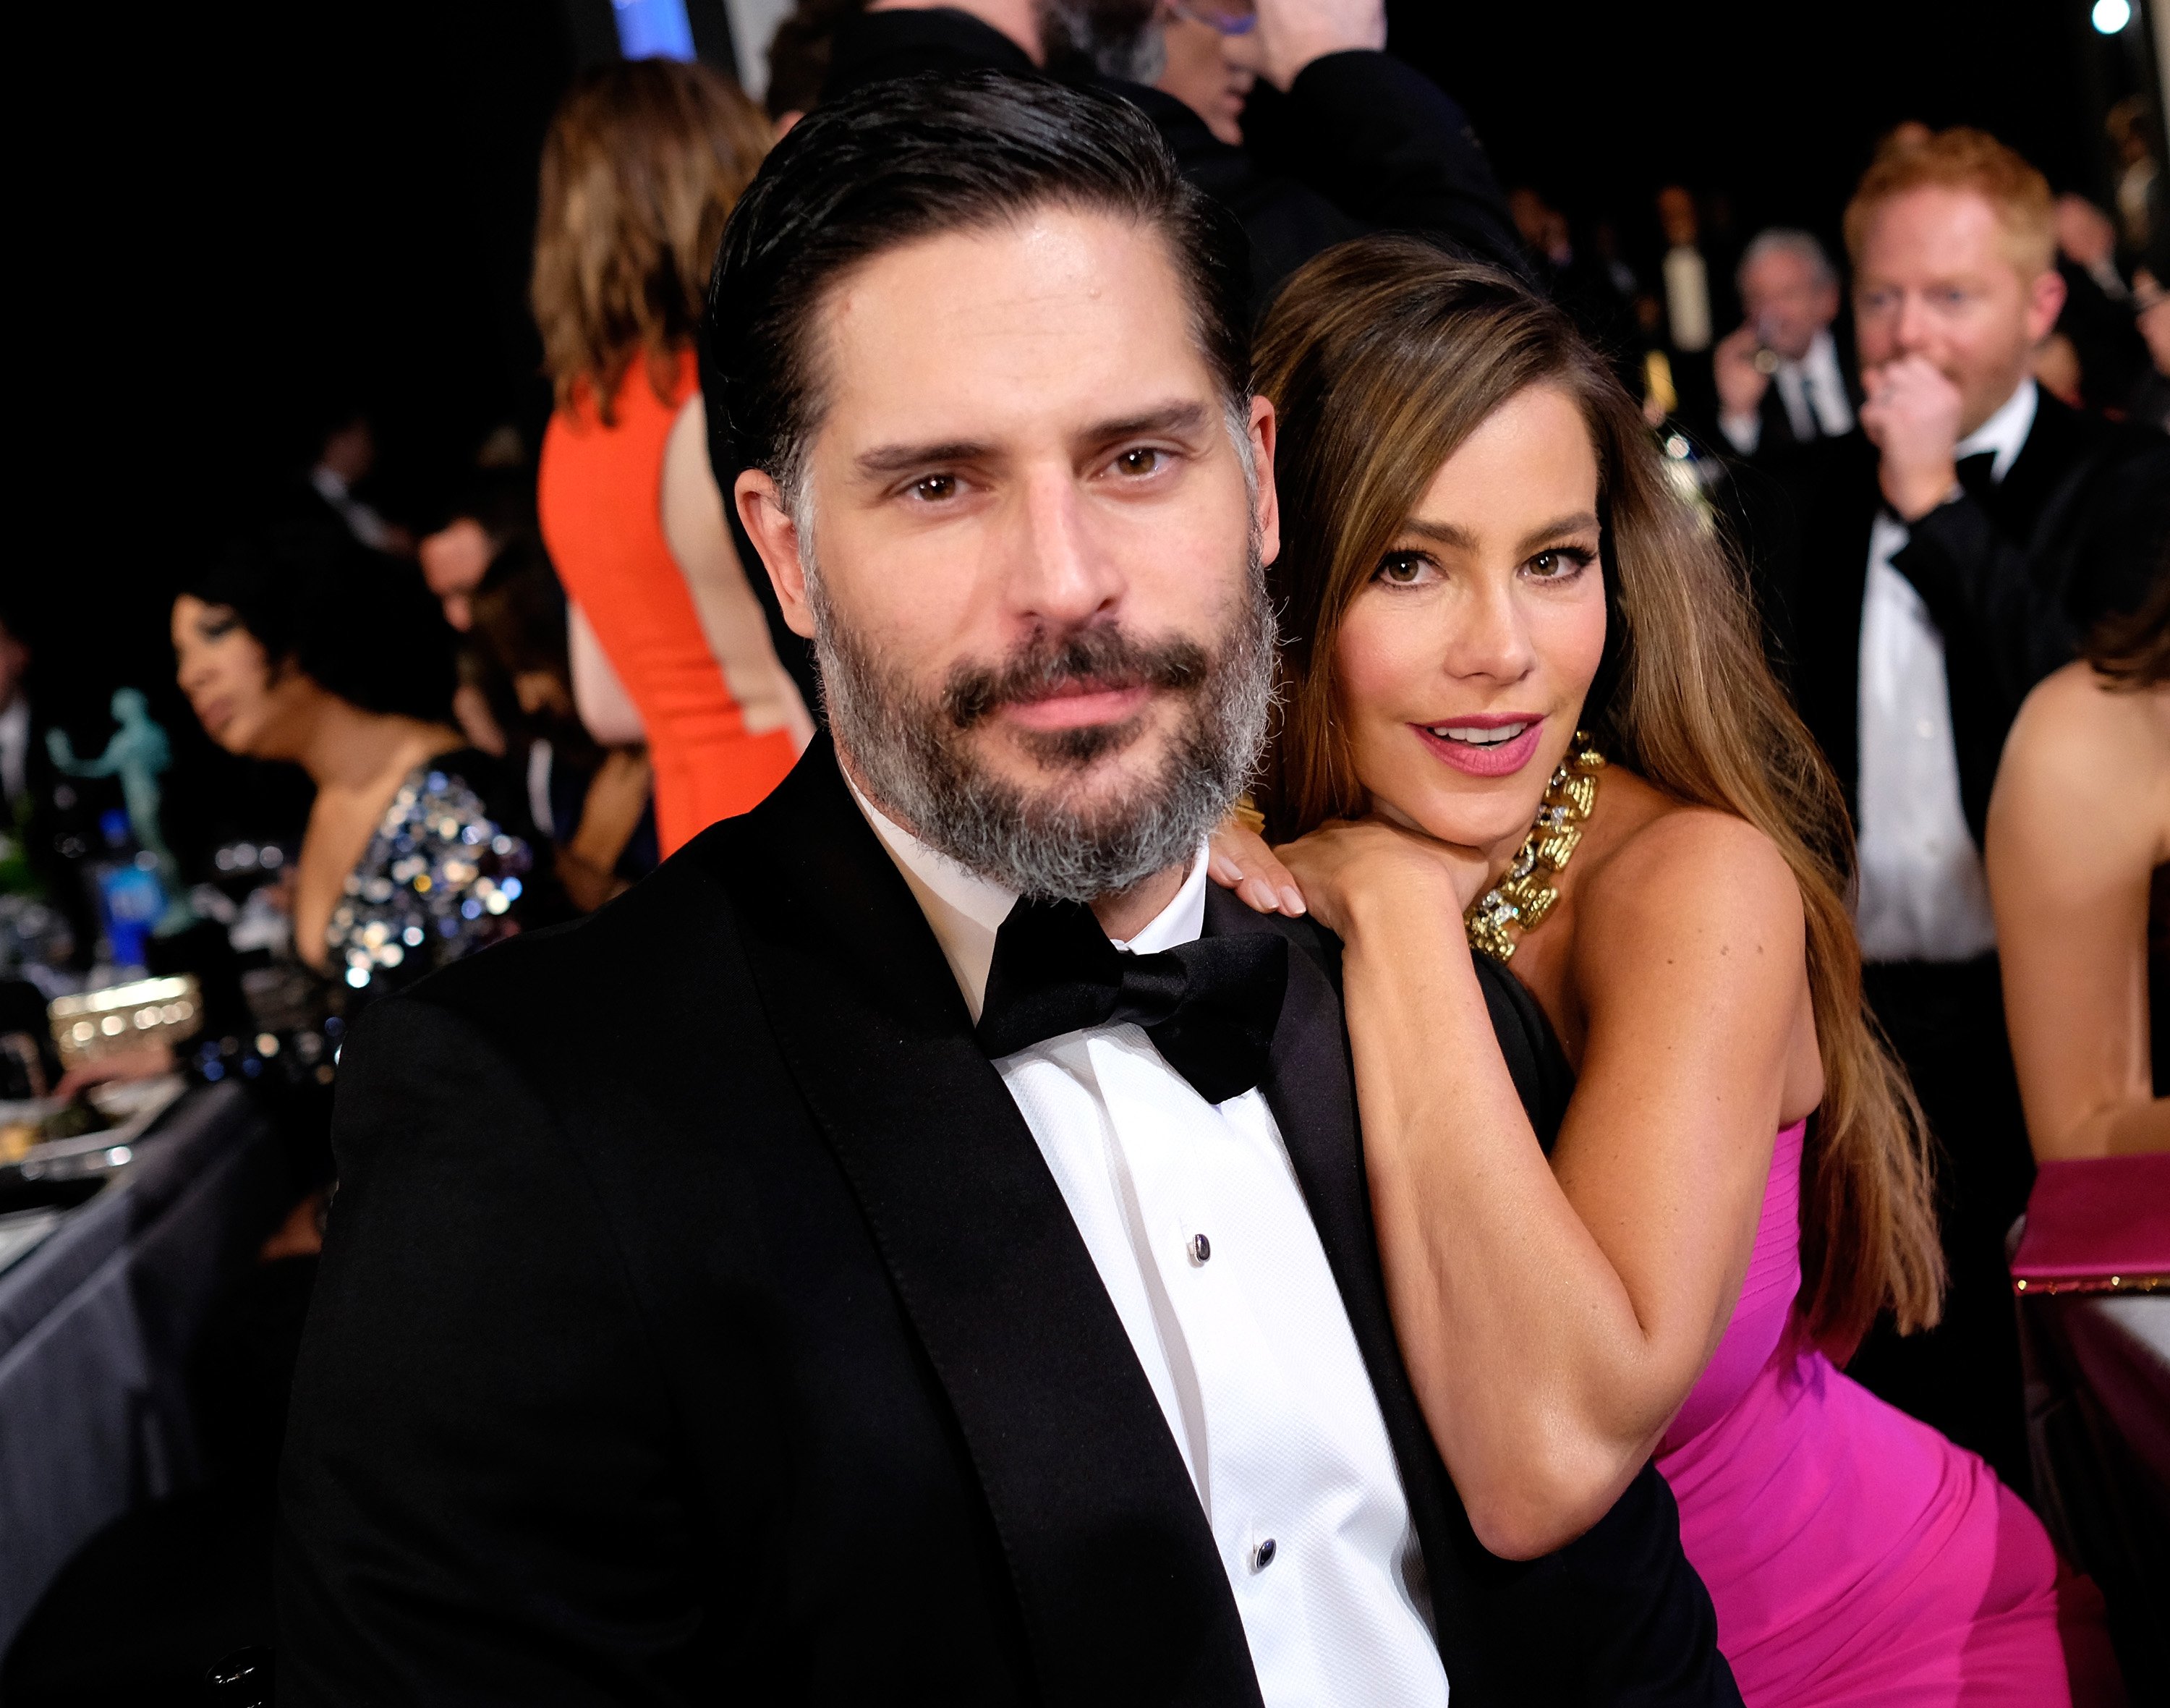 Joe Manganiello and Sofia Vergara attend The 22nd Annual Screen Actors Guild Awards on January 30, 2016 in Los Angeles, California. | Photo: Getty Images